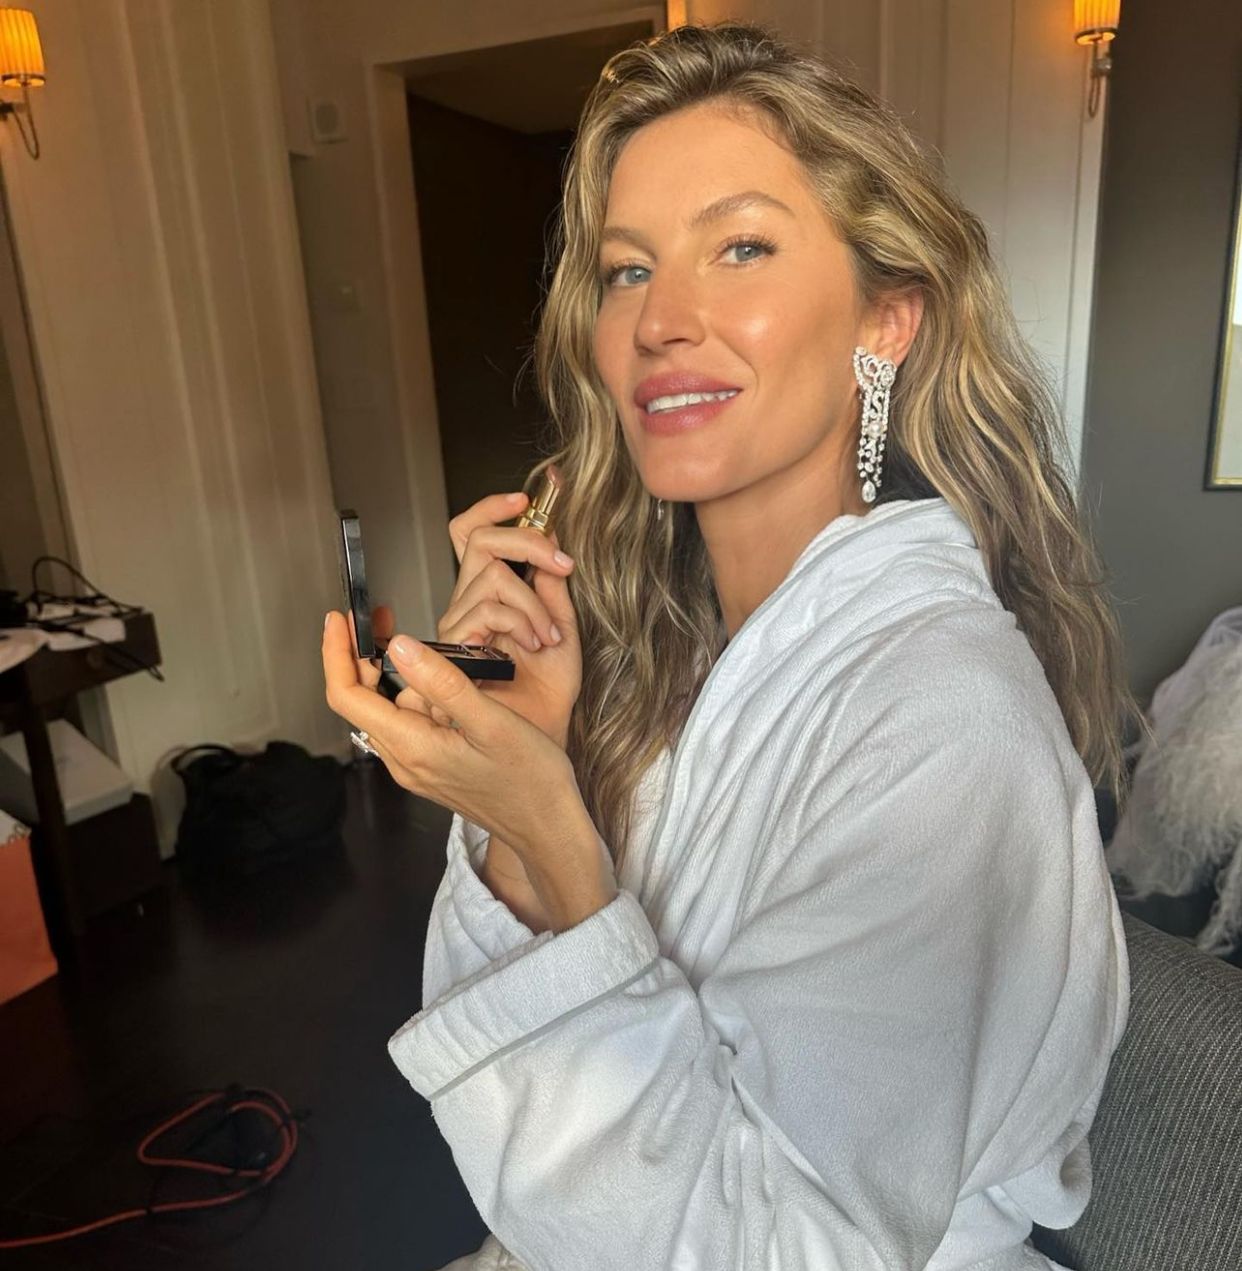 Gisele got emotional when talking about her divorce from Tom Brady. (Photo: Instagram)